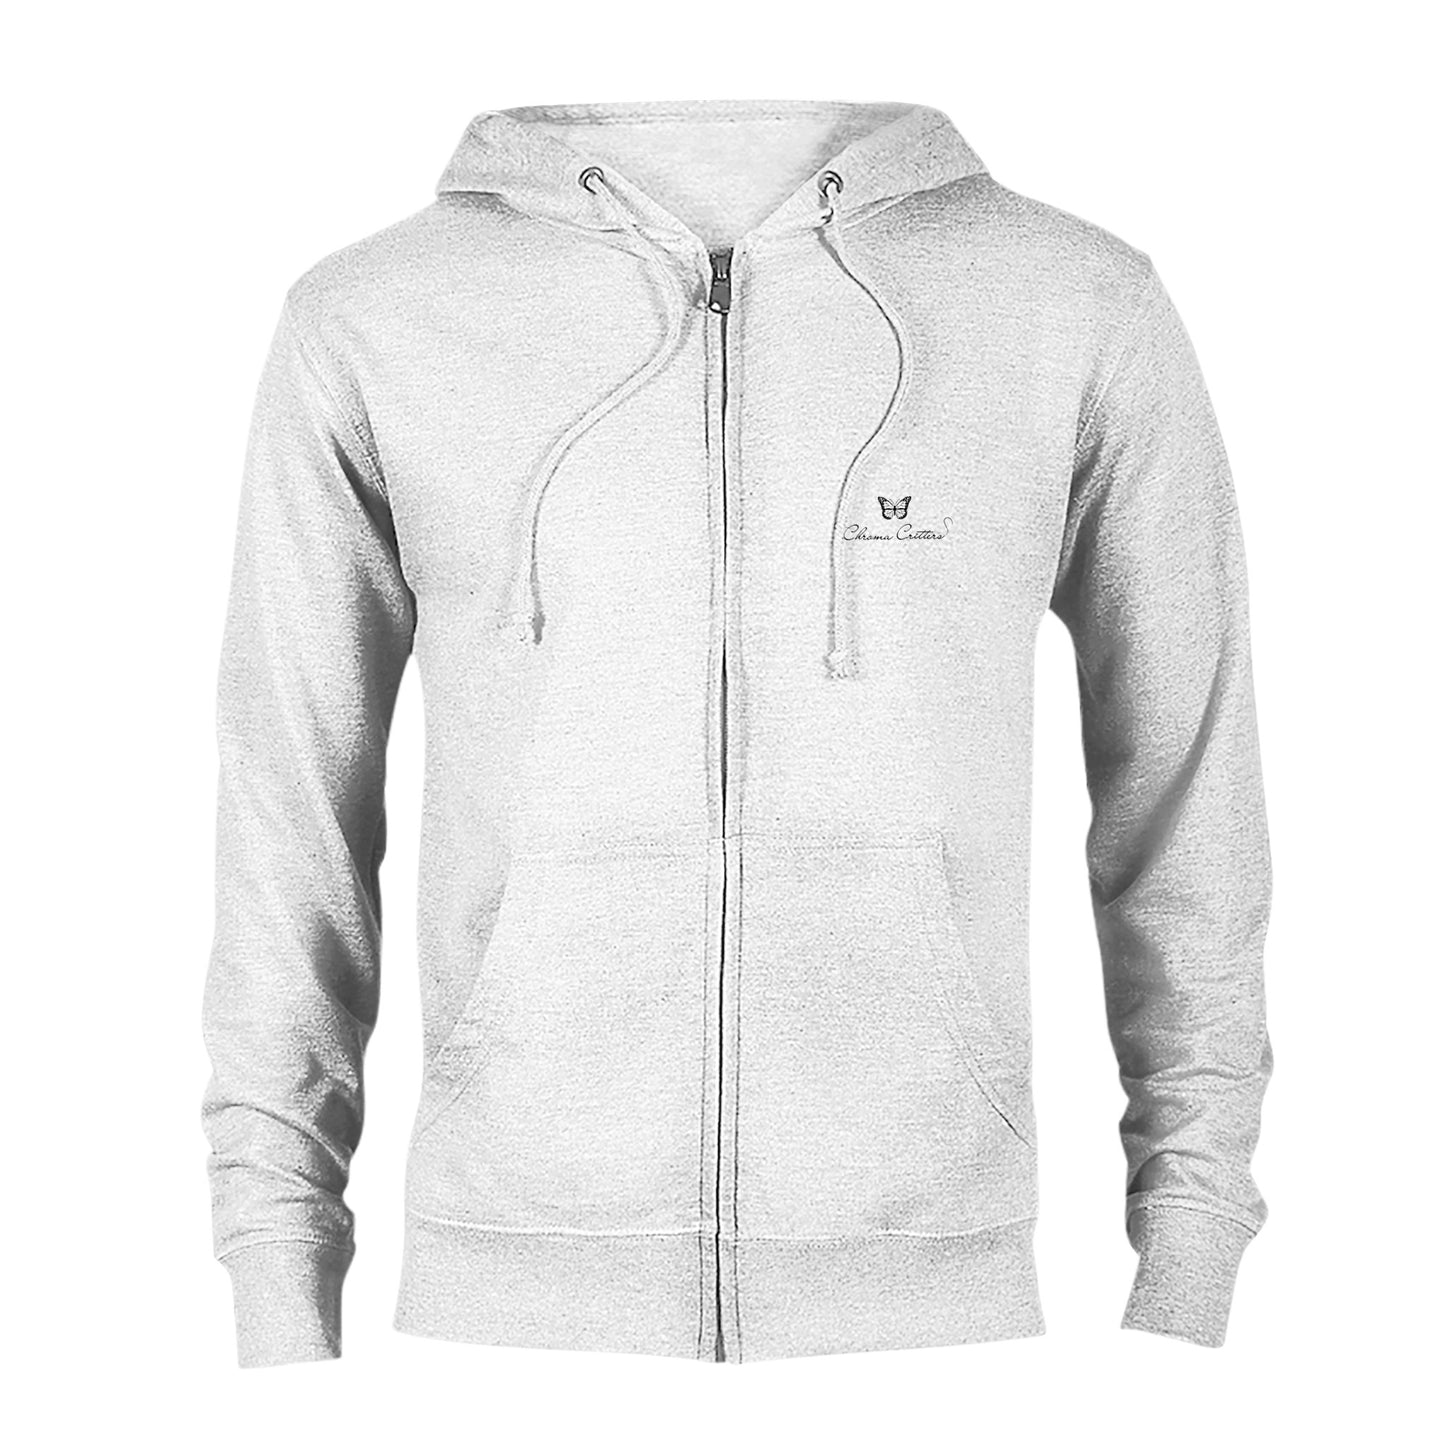 Shiny and Peaceful Fantasy Horse - Unisex Zip Hoodie